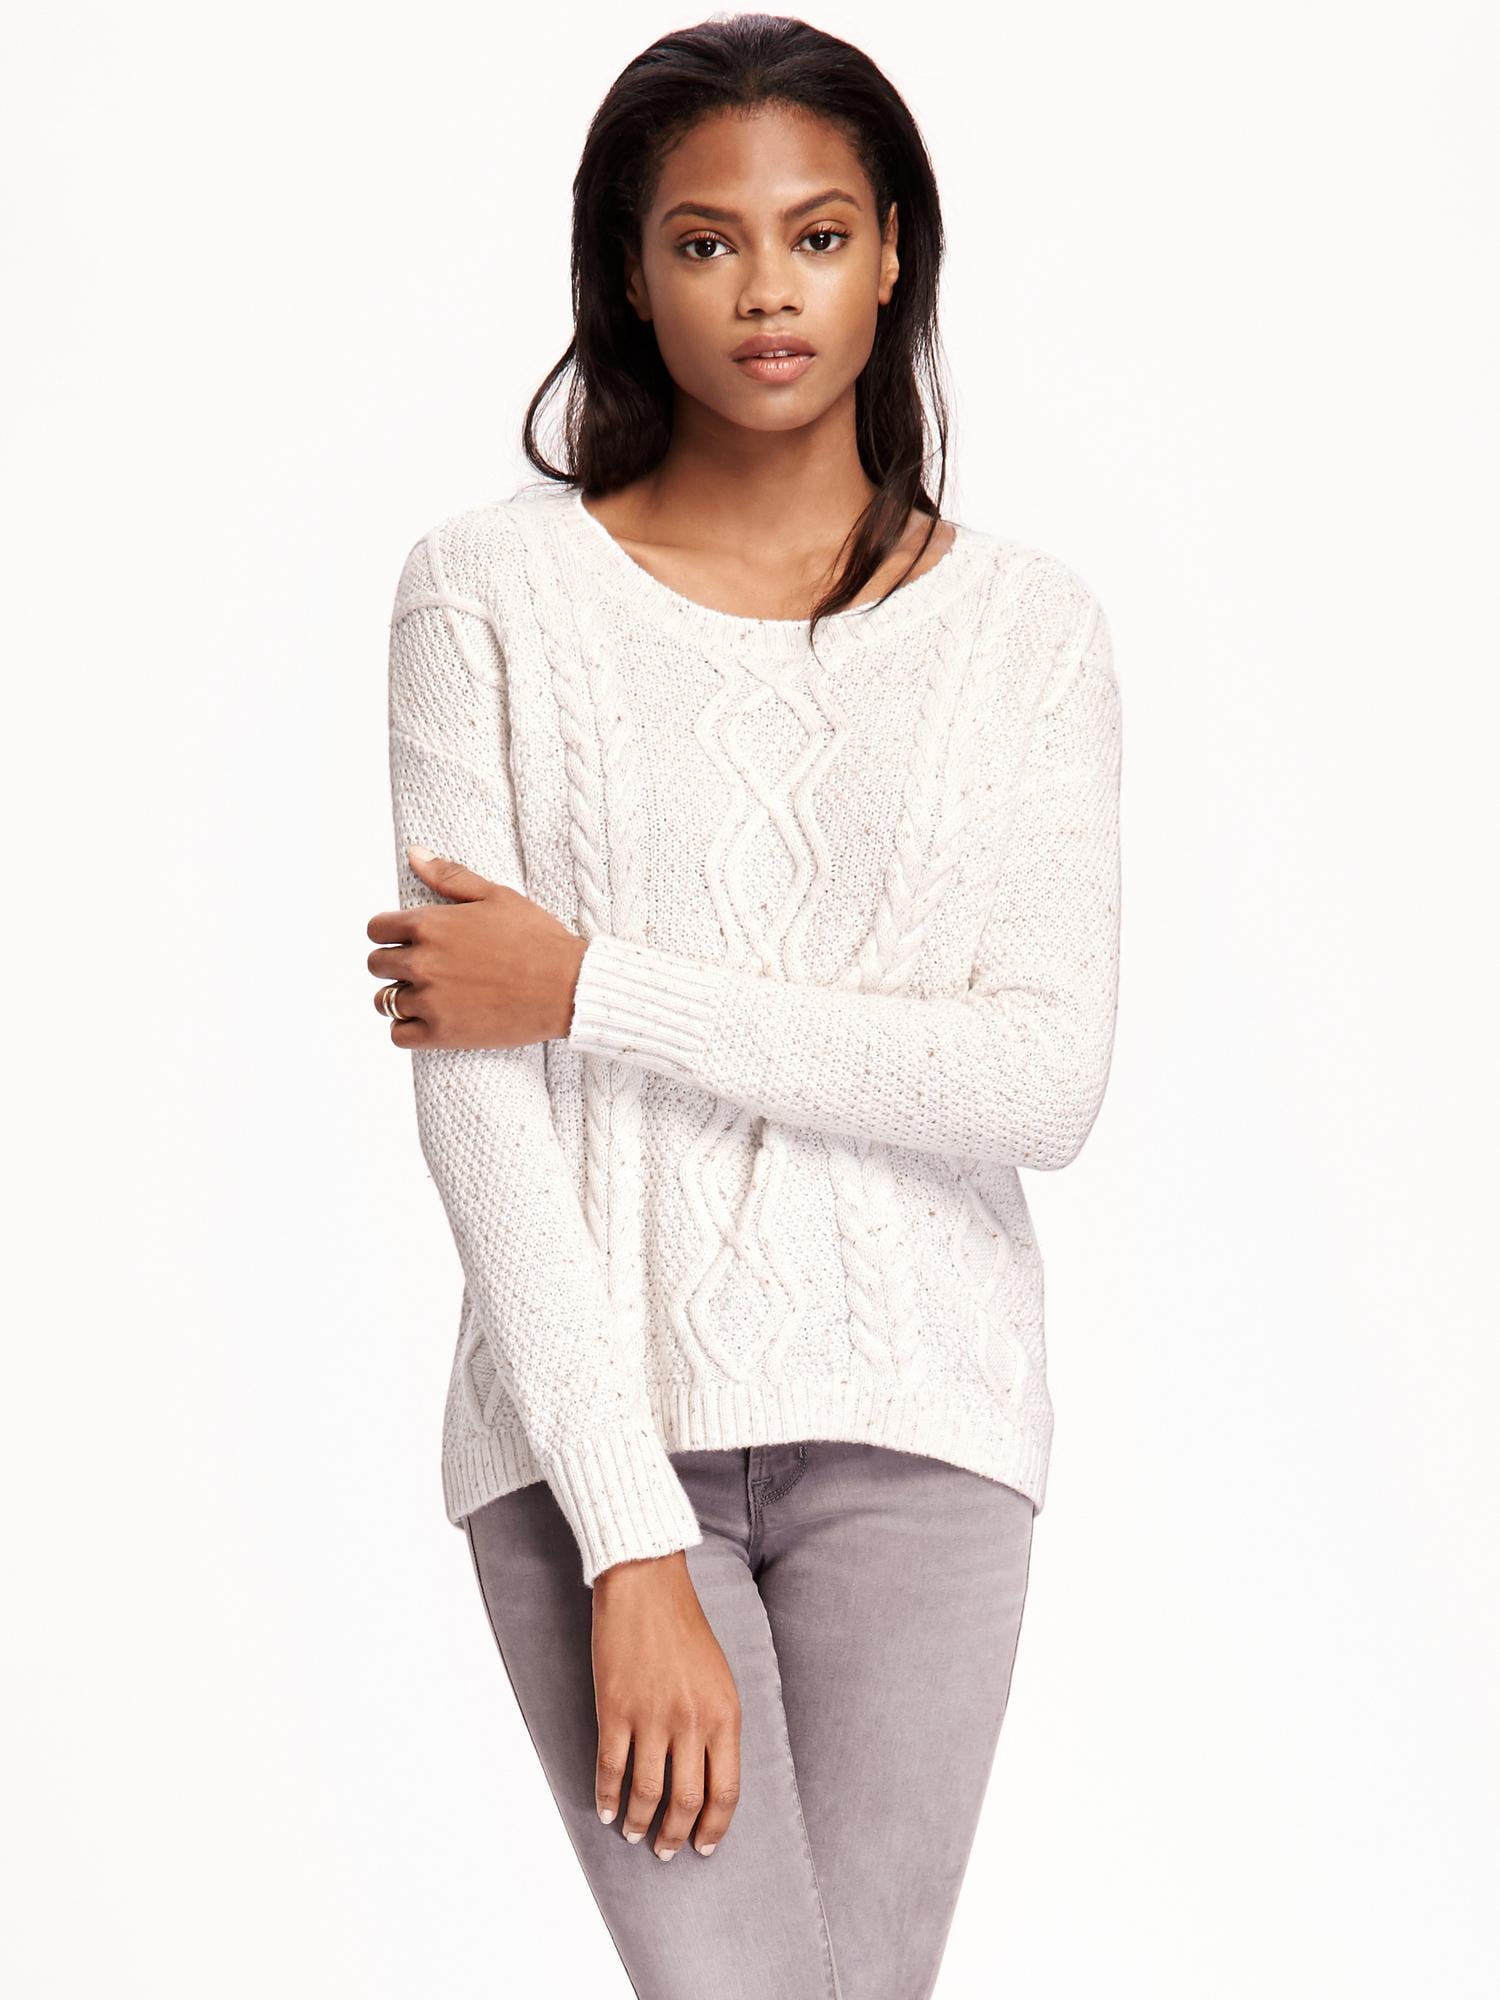 Cable-Knit Sweater for Women